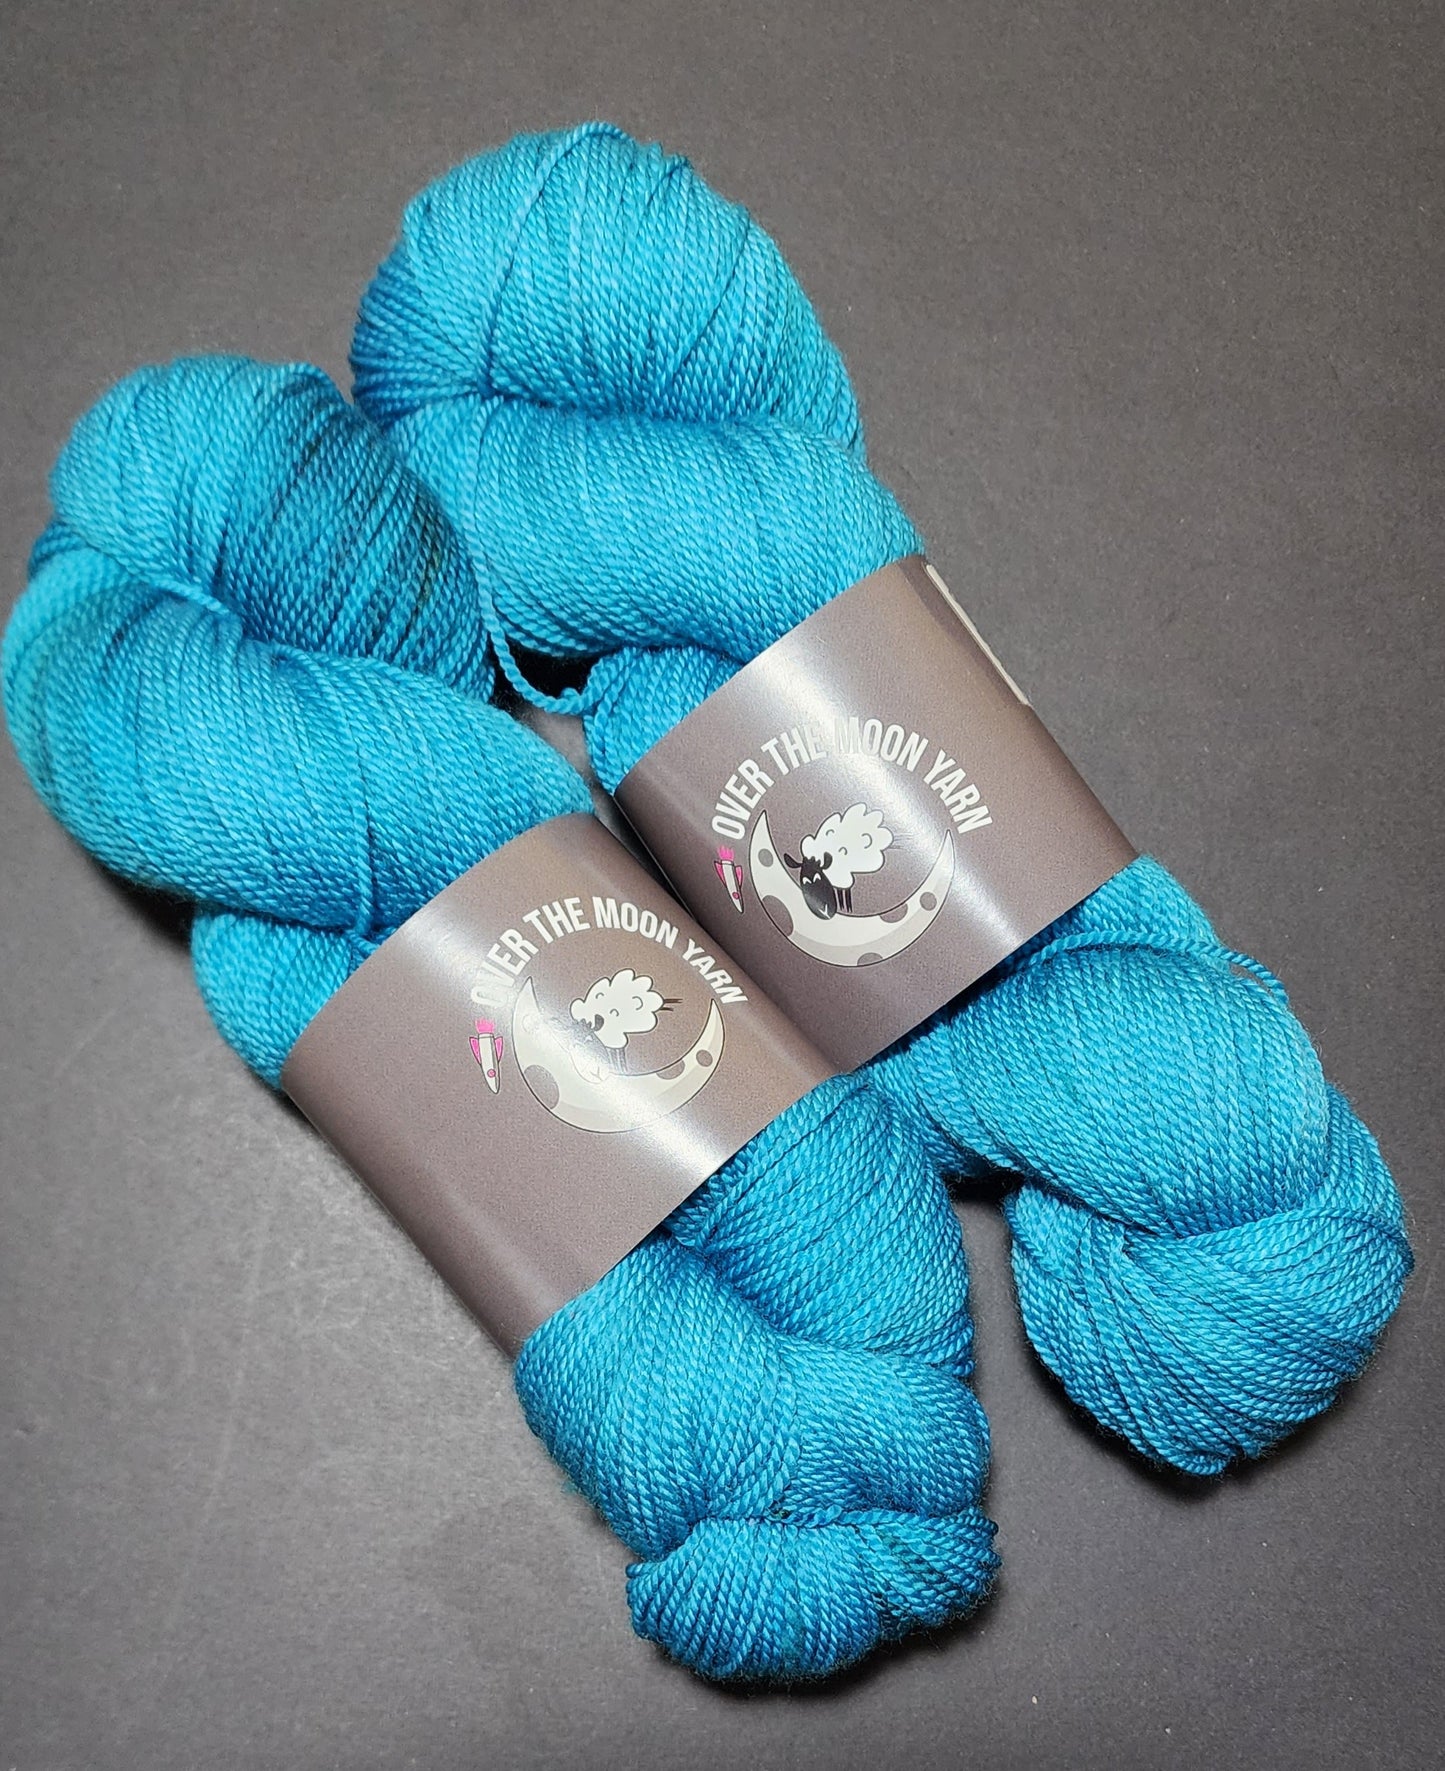 The Universe is Turquiose - Ion Fingering, 100 gram, 360 m, Speckled Yarn